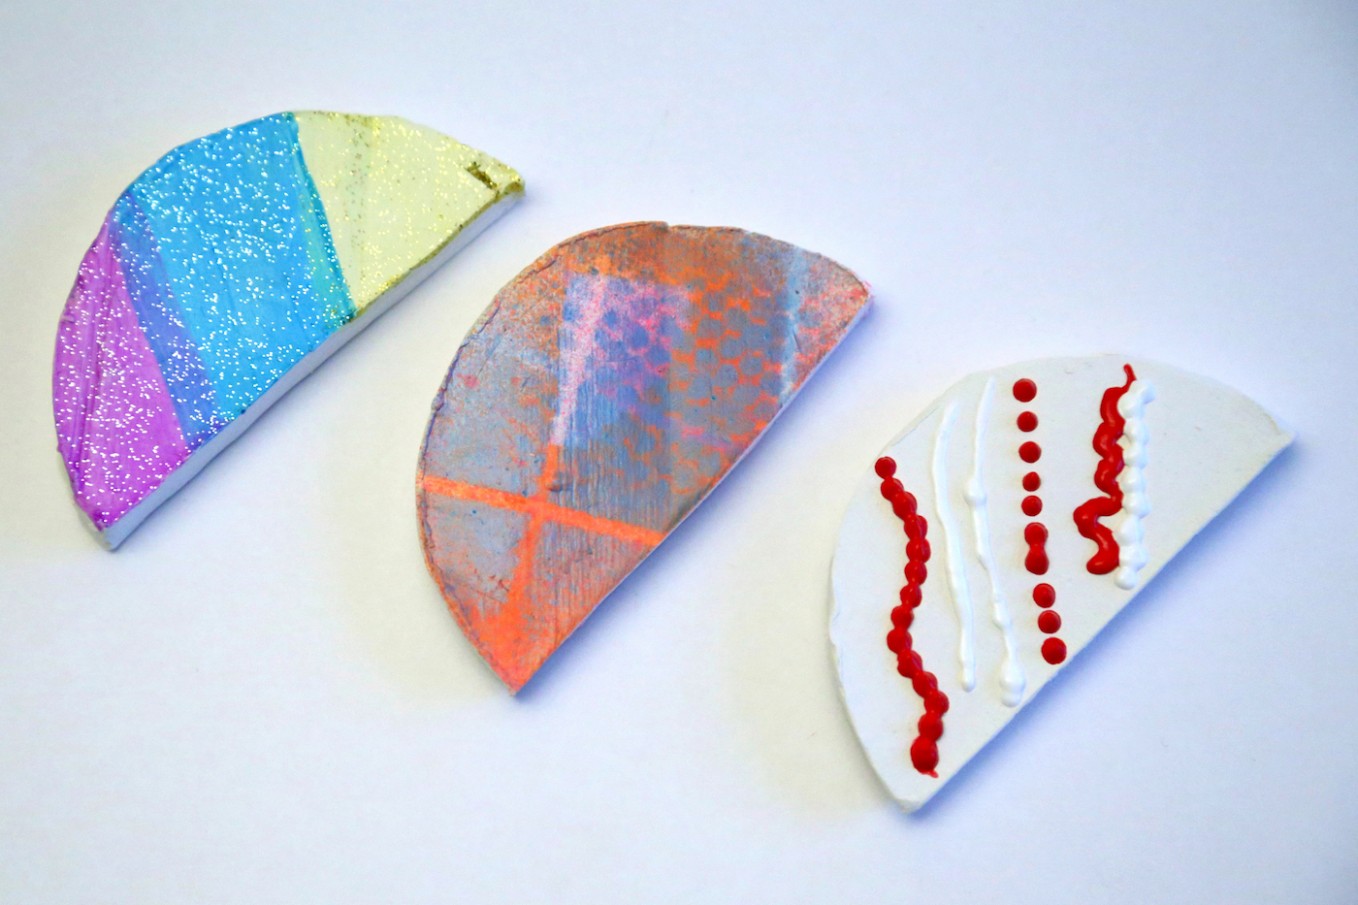 Forget Glazing! 7 Other Innovative Ways To Add Color To Clay ..